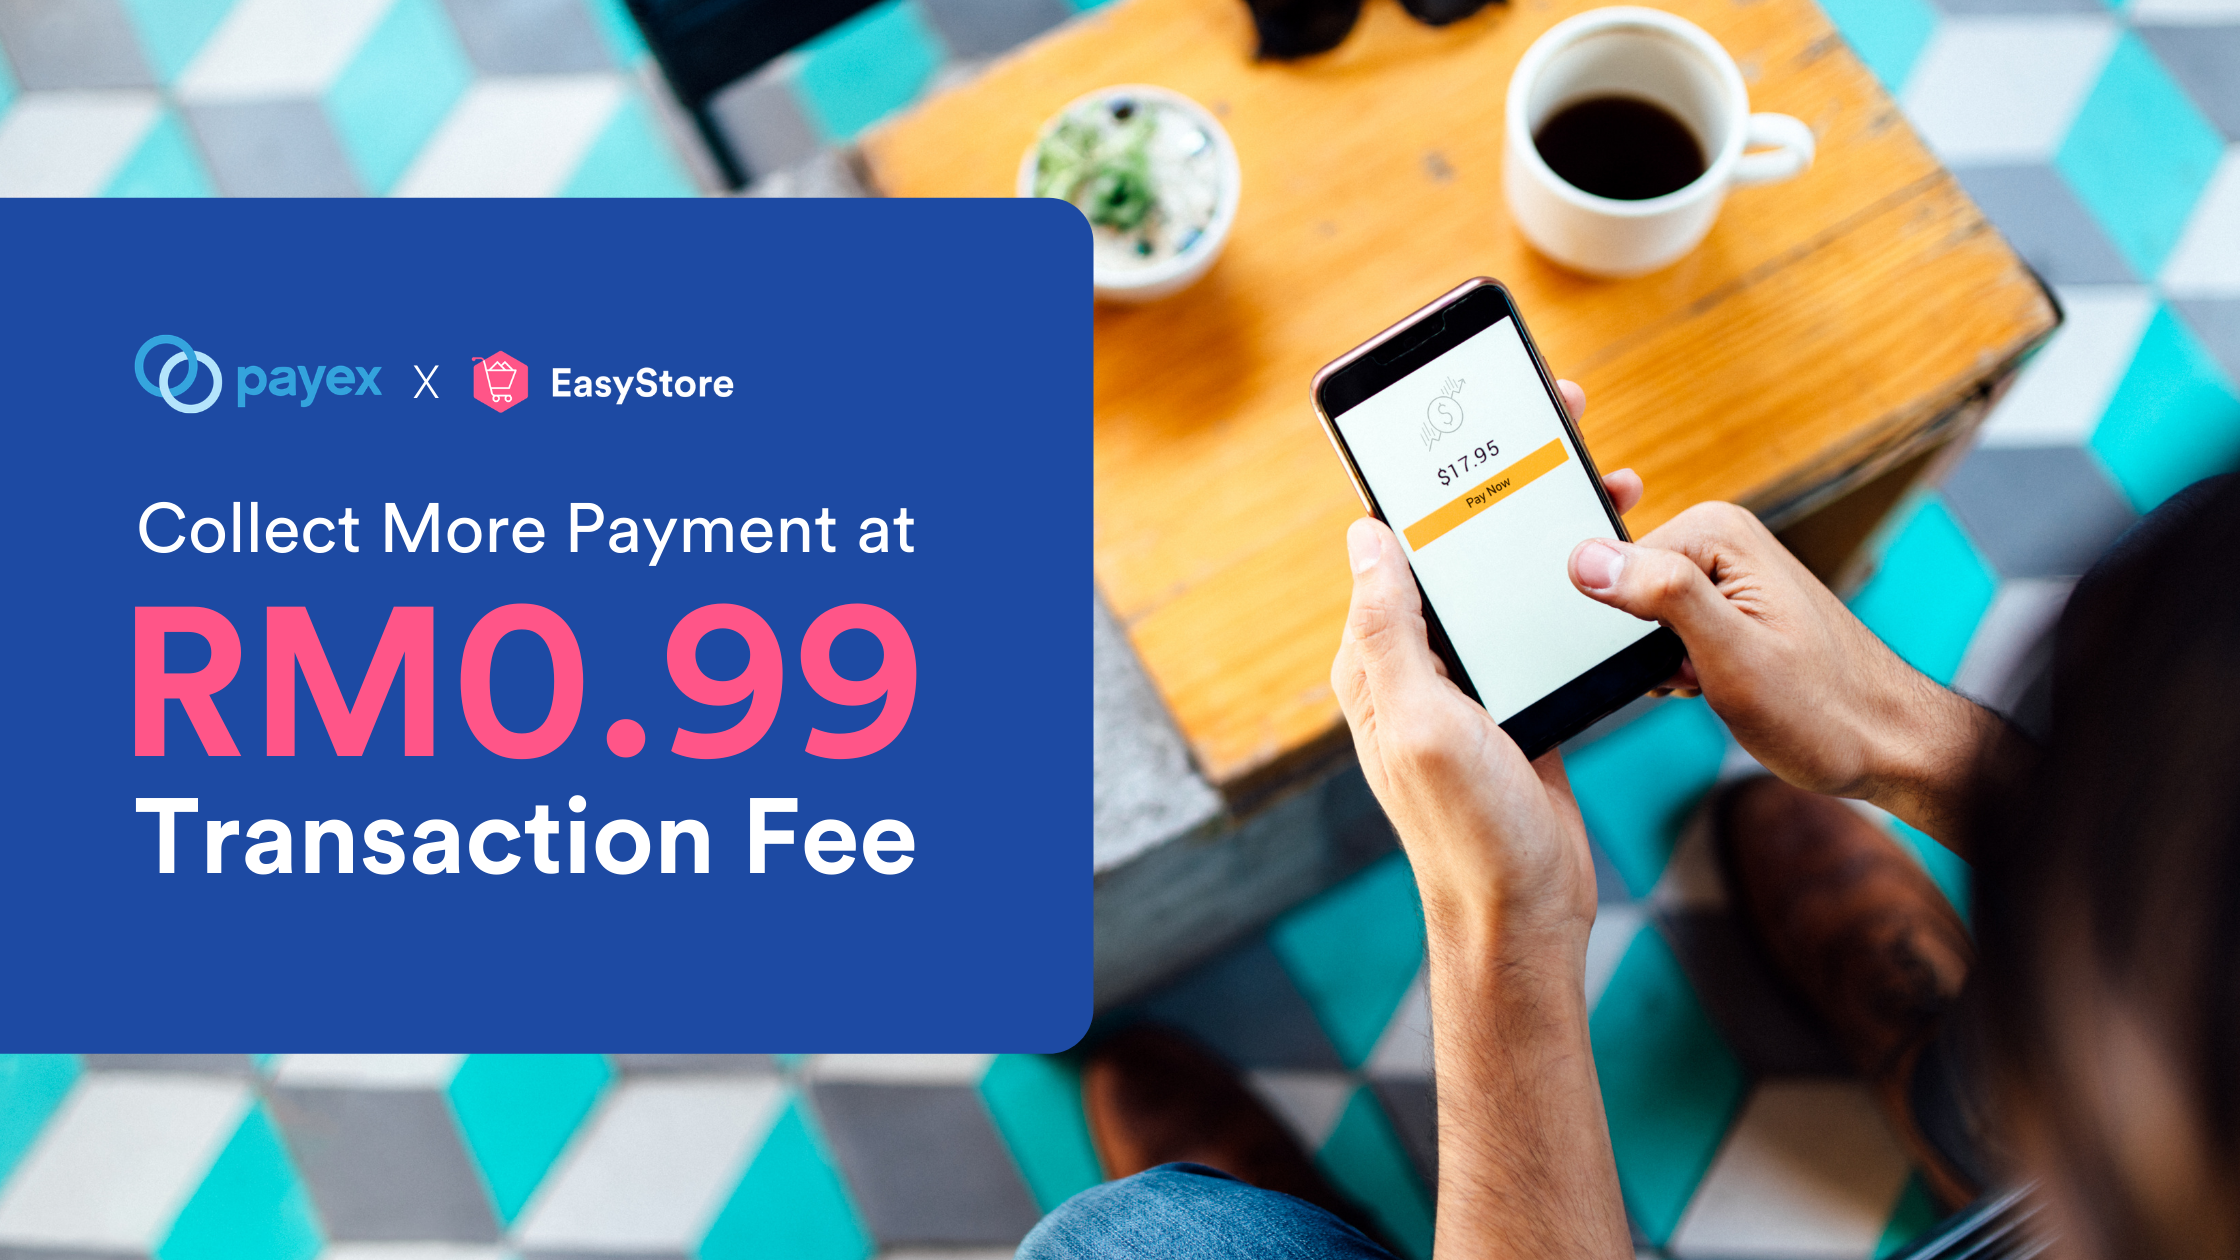 Collect Online Payment at Only RM0.99 Transaction Fee With Payex | EasyStore